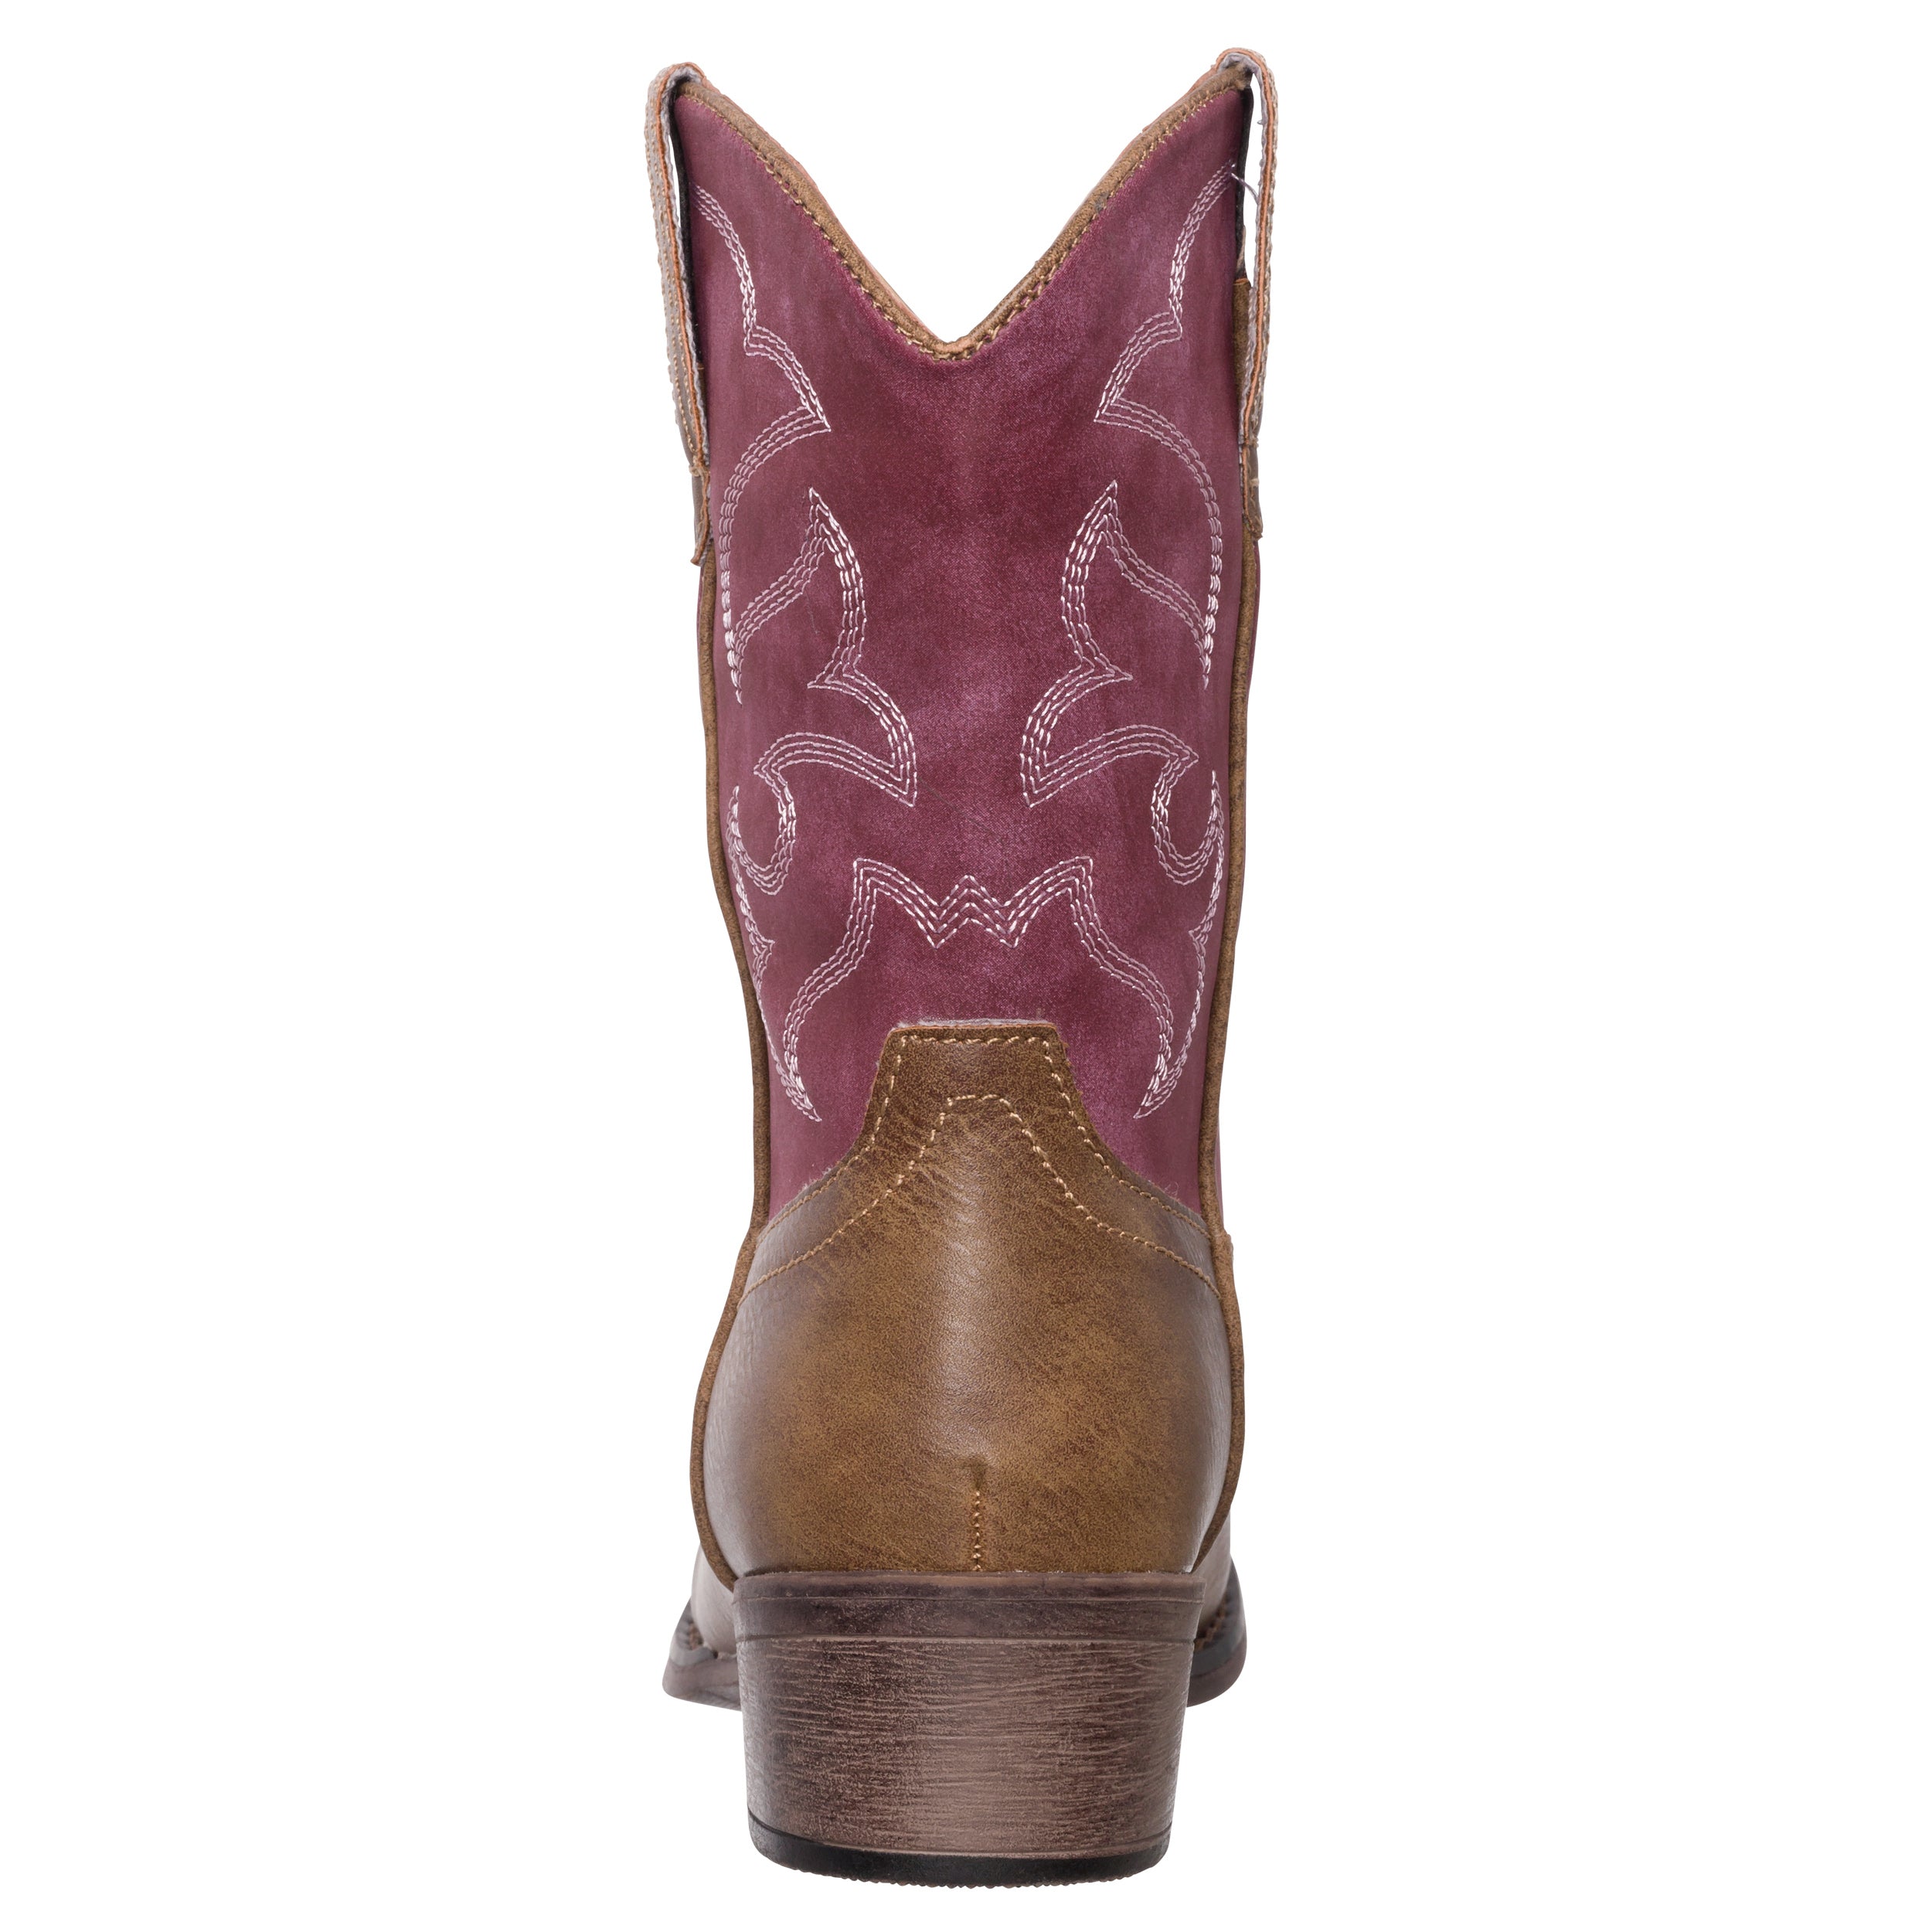 Children Western Cowboy Cowgirl Boot, Monterey by Silver Canyon for Boys and Girls, Vintage Raspberry Brown